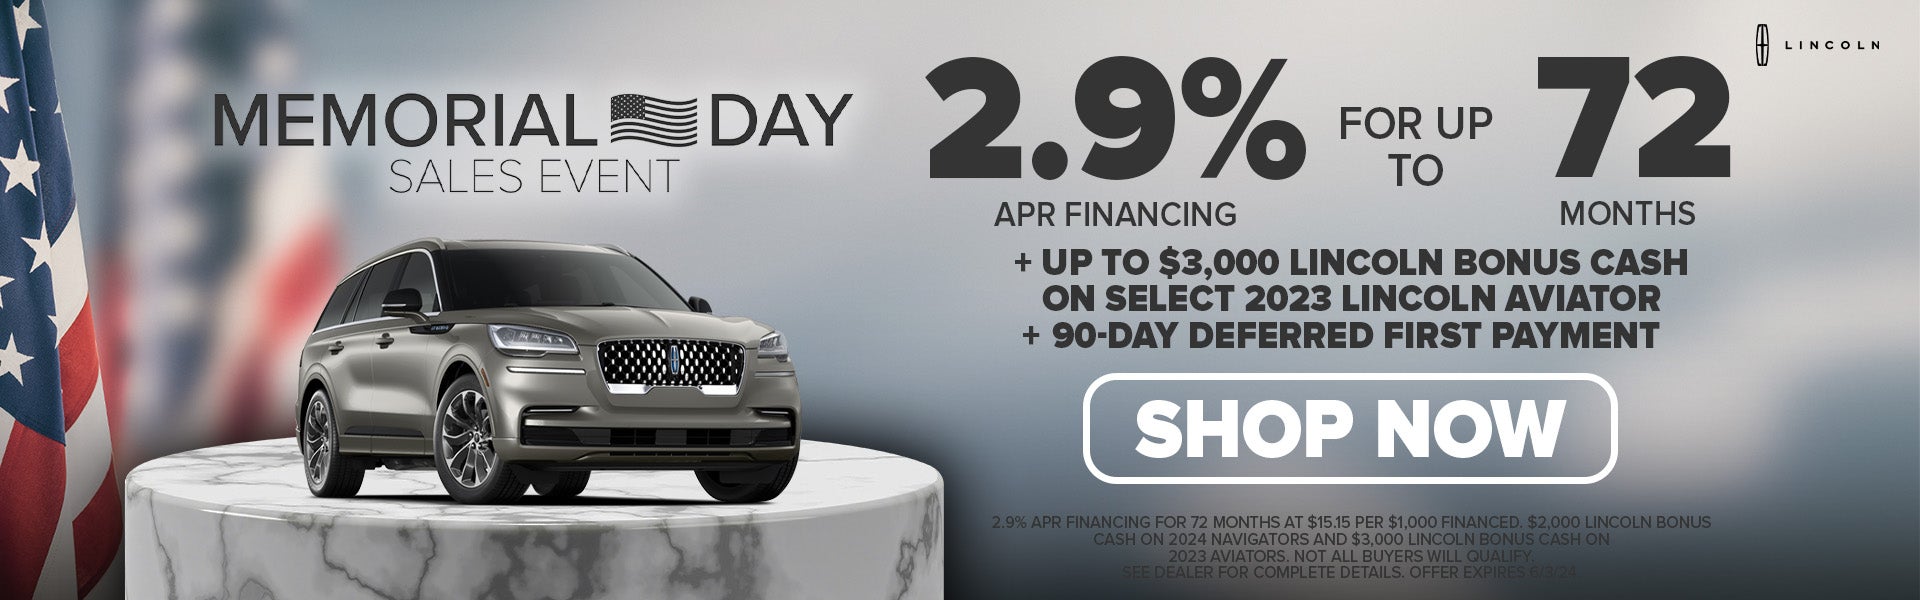 2.9% for 72 months + $3,000 off 2023 Aviator